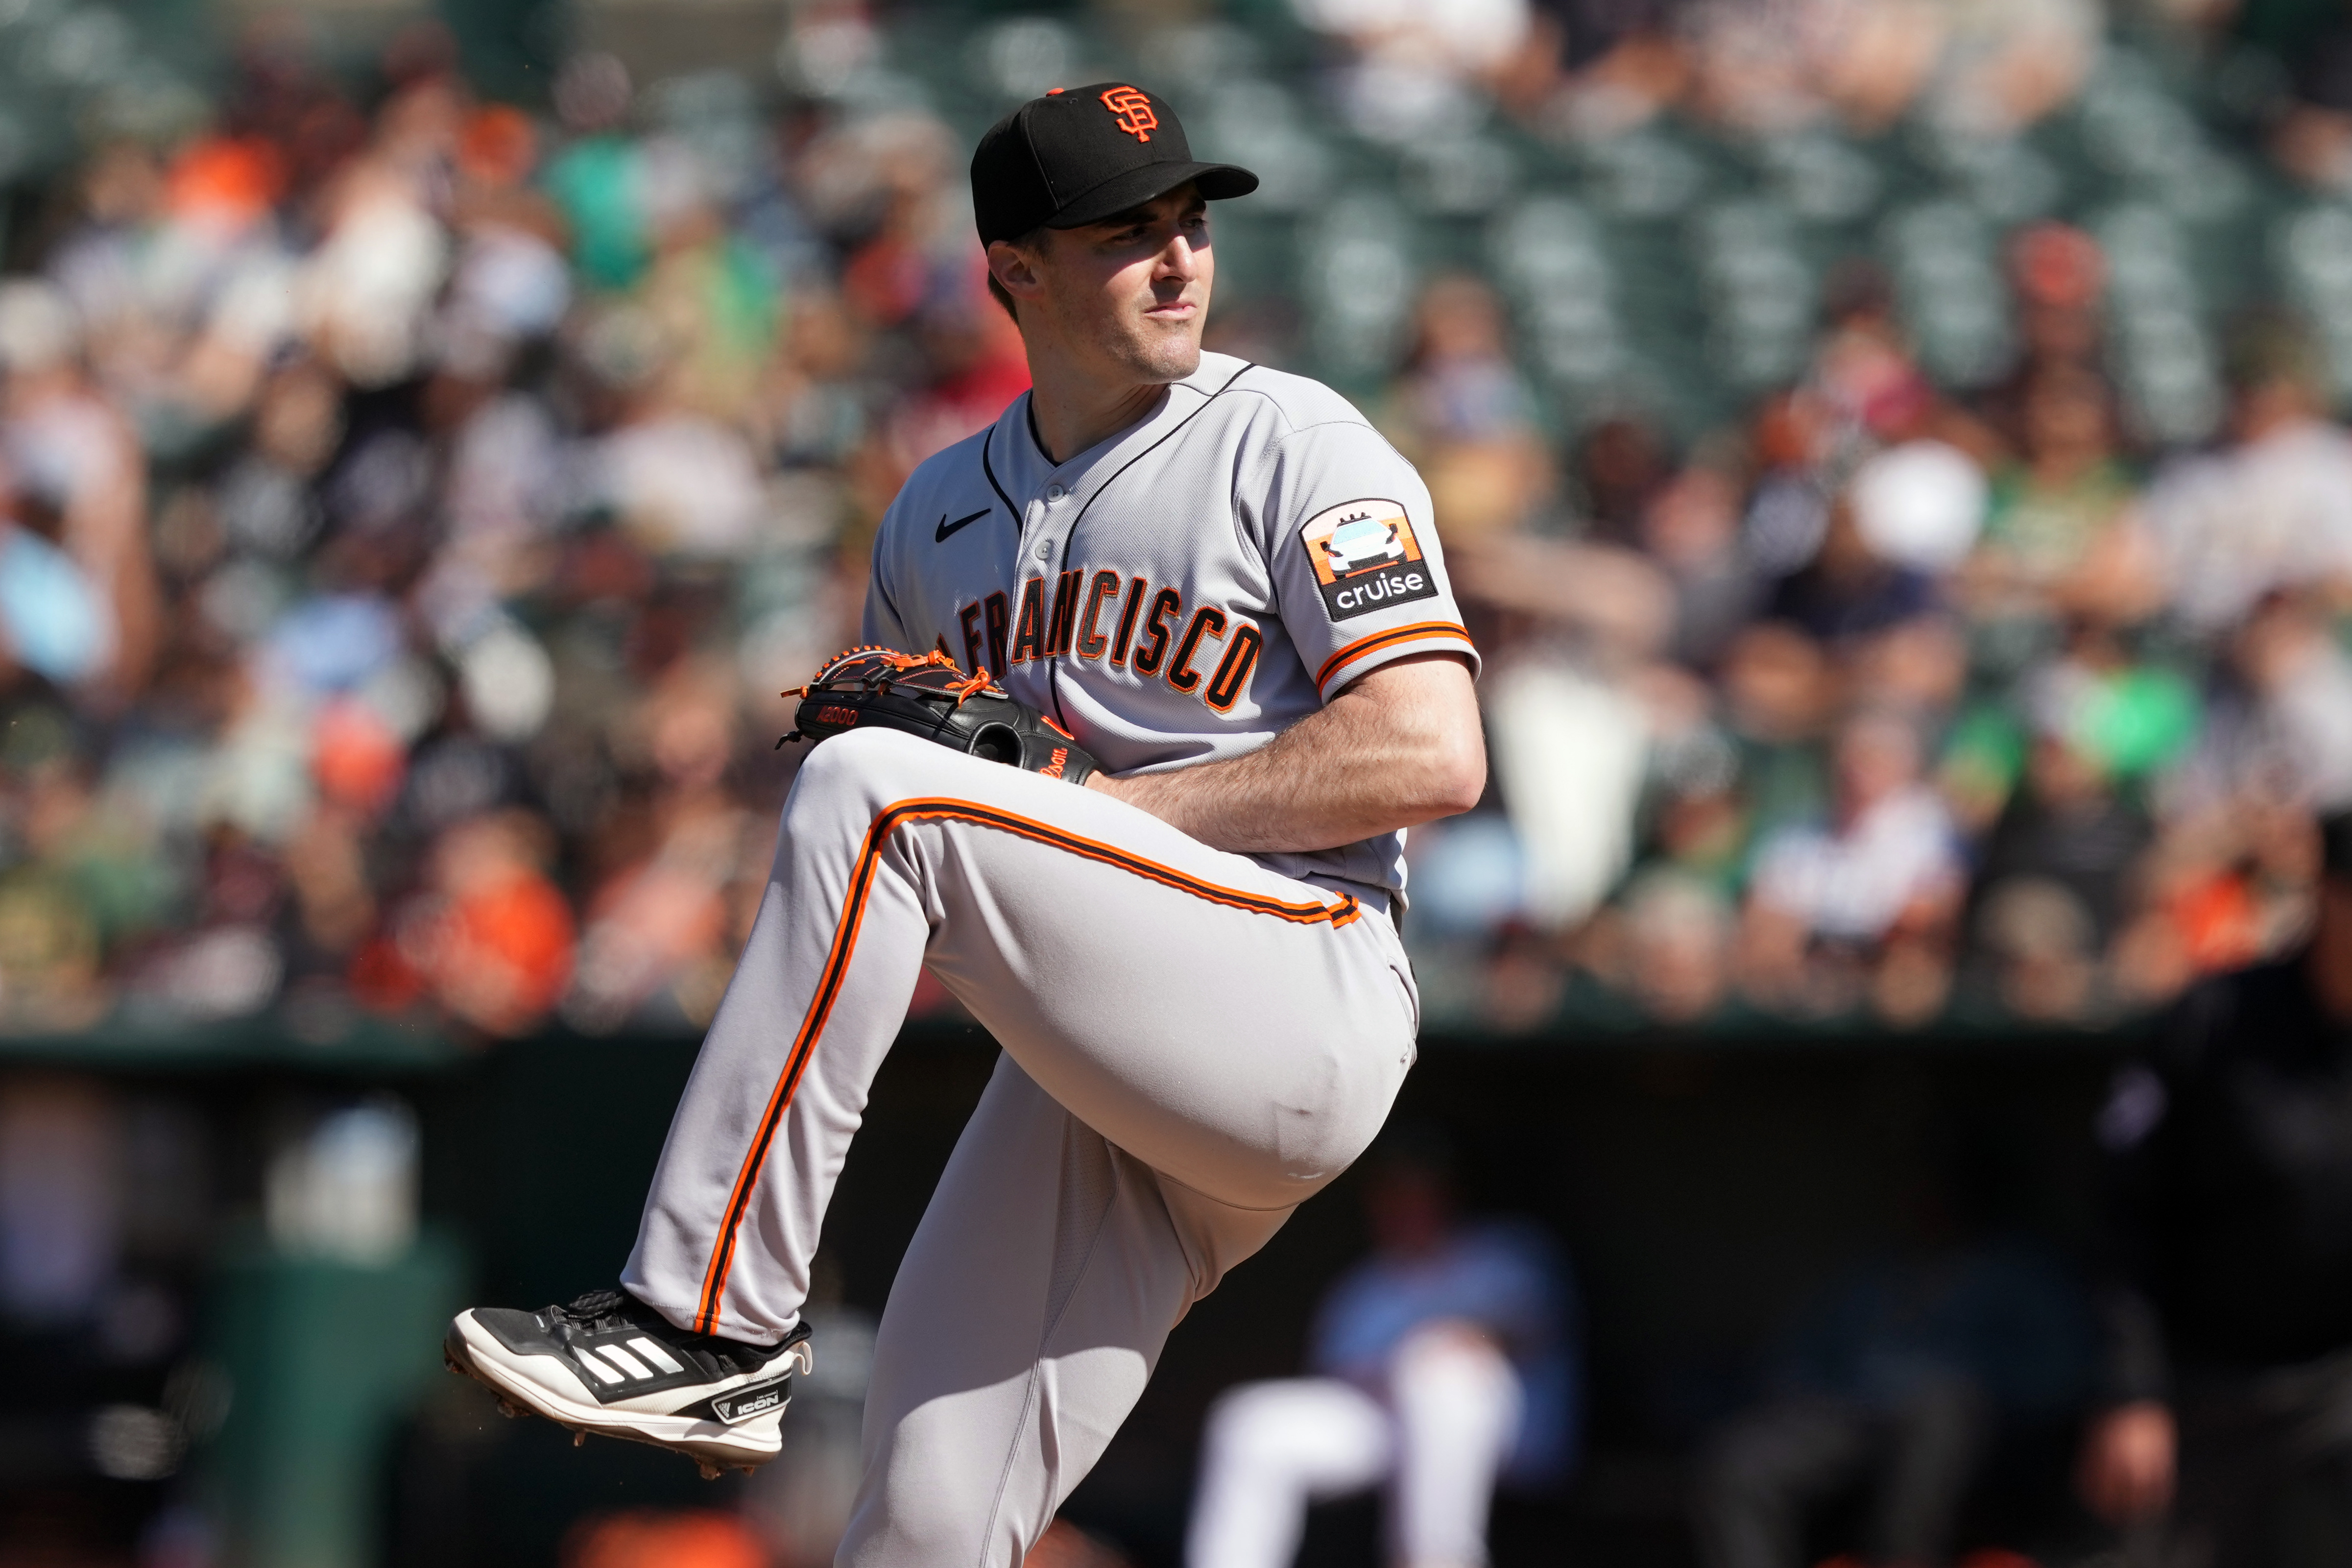 SF Giants starting pitcher Ross Stripling throws a pitch against the Oakland Athletics during the first inning at Oakland-Alameda County Coliseum on August 5, 2023.